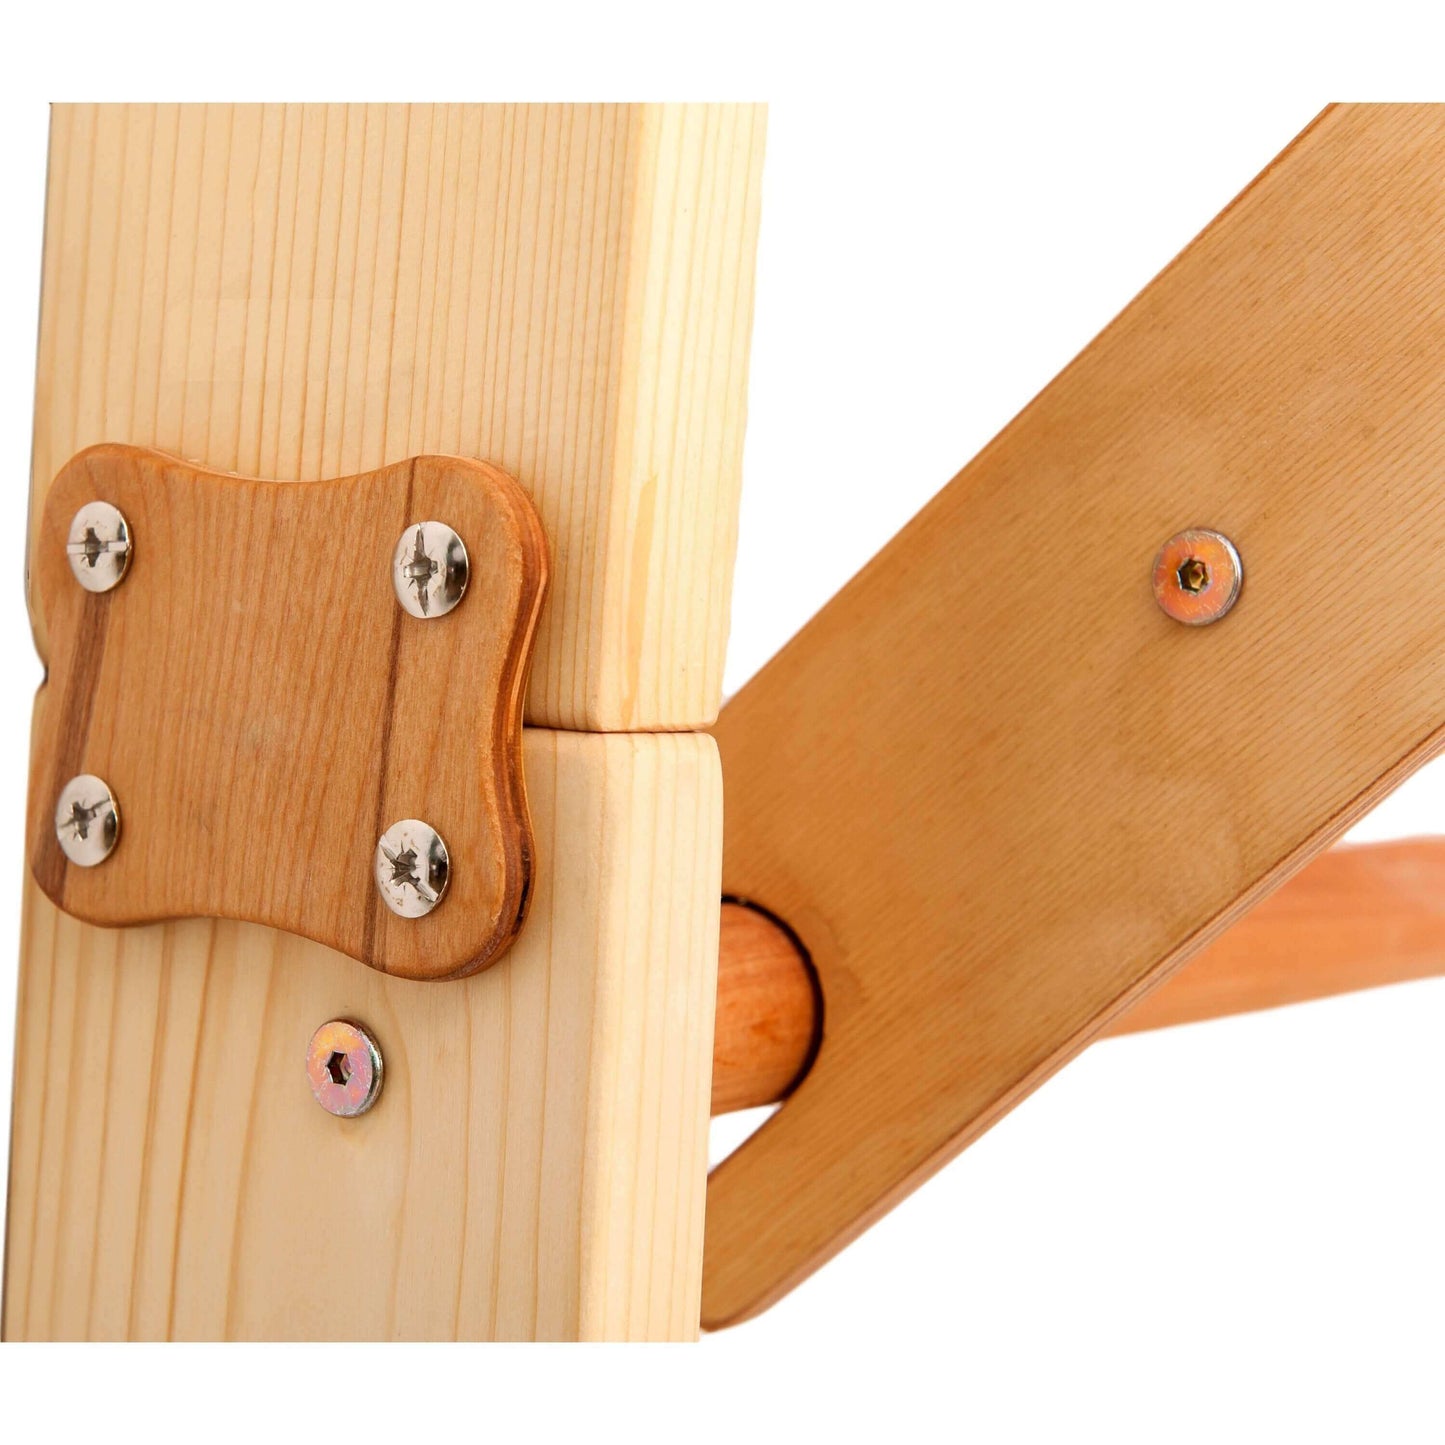 Climbing wall SPORT2 for children and young people, untreated wood